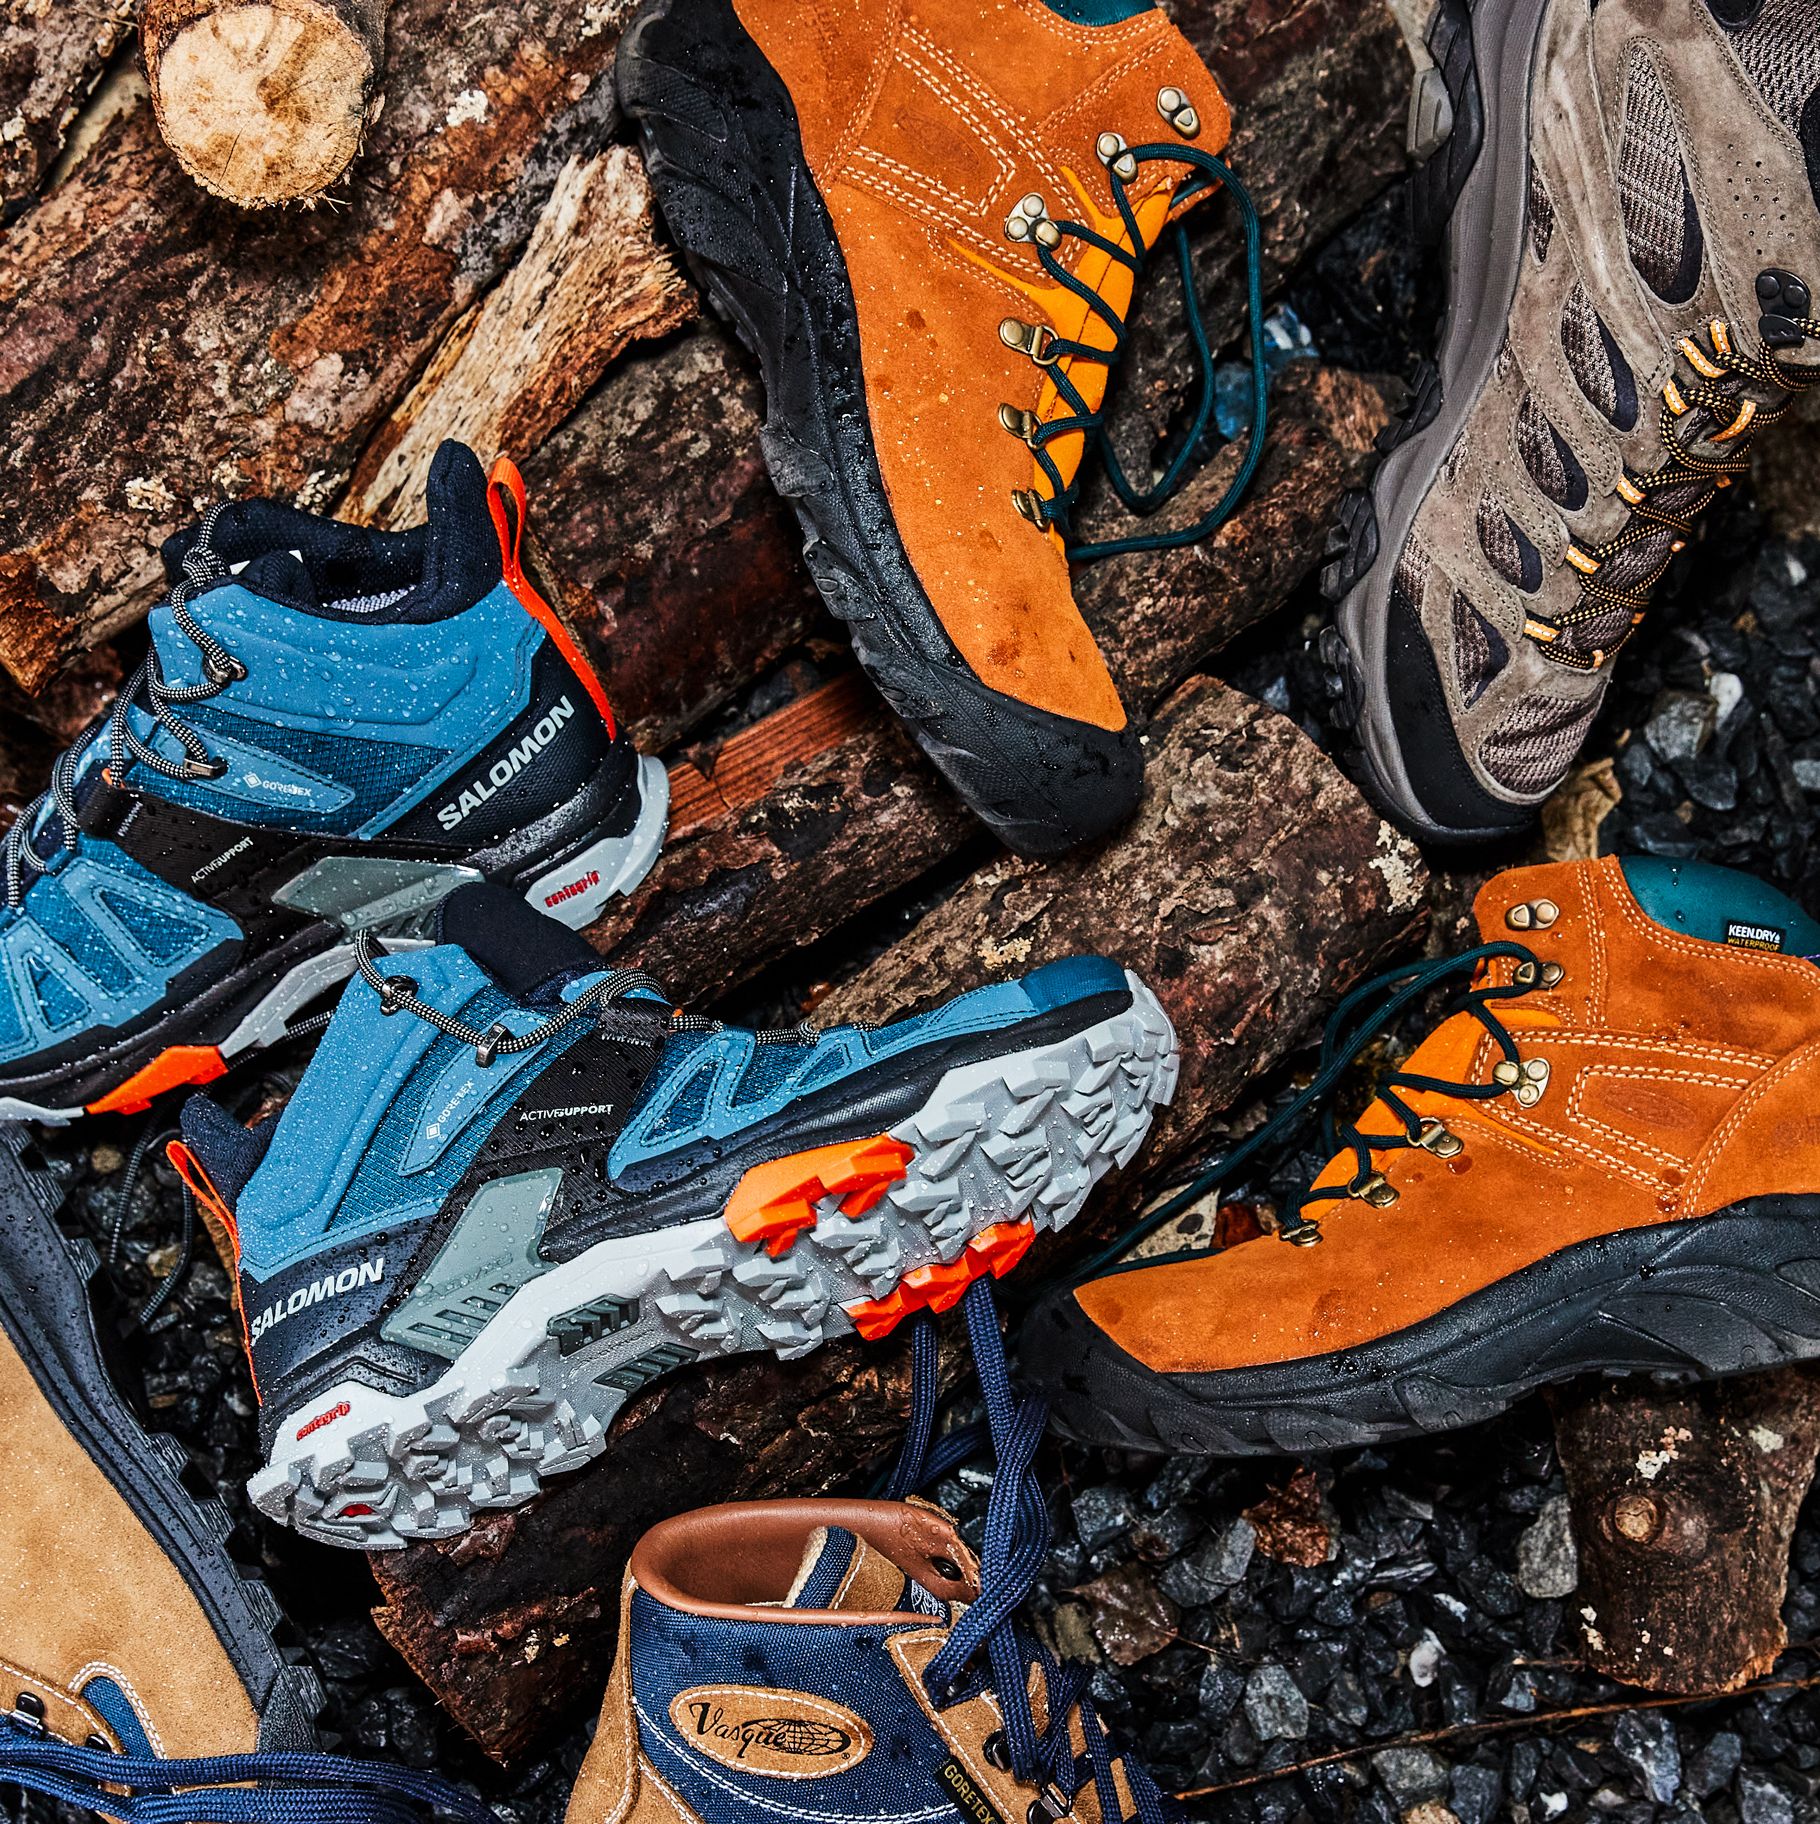 Lace Up These Editor-Approved Hiking Boots and Embark on Your Next Outdoor Adventure